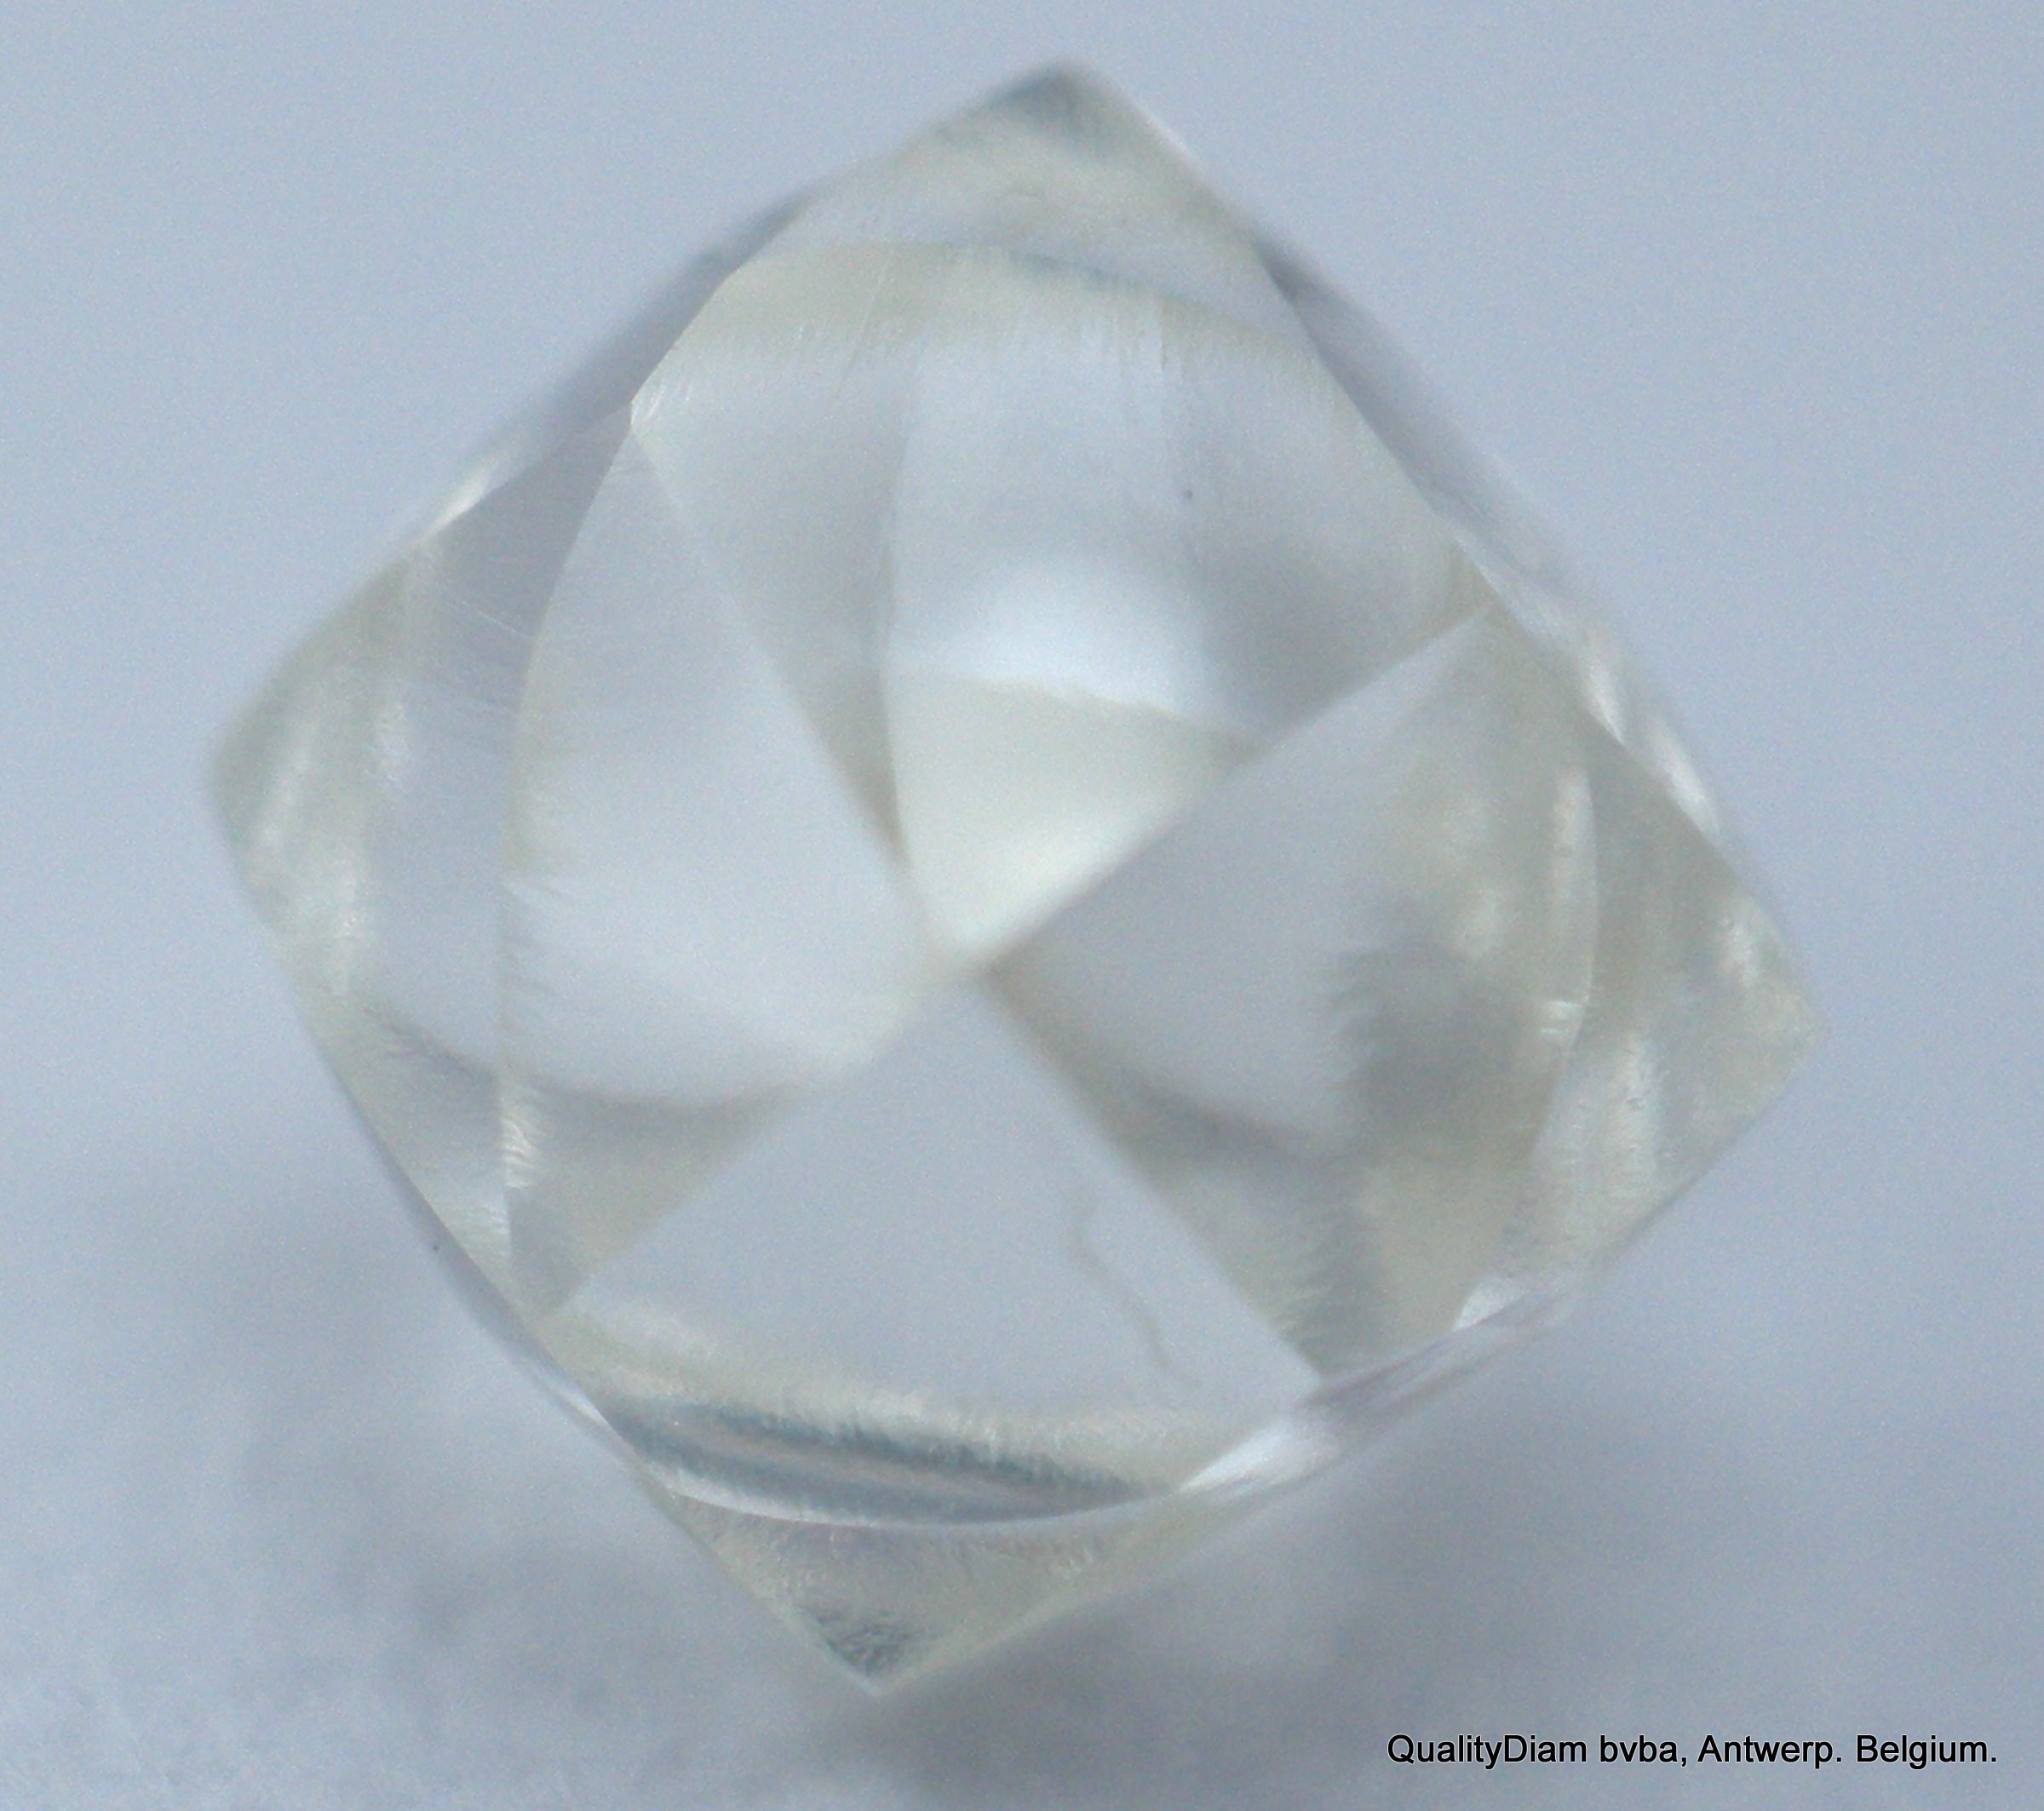 I Flawless Clean Diamond Out From Diamond Mine Rough Uncut Natural Gem Diamond